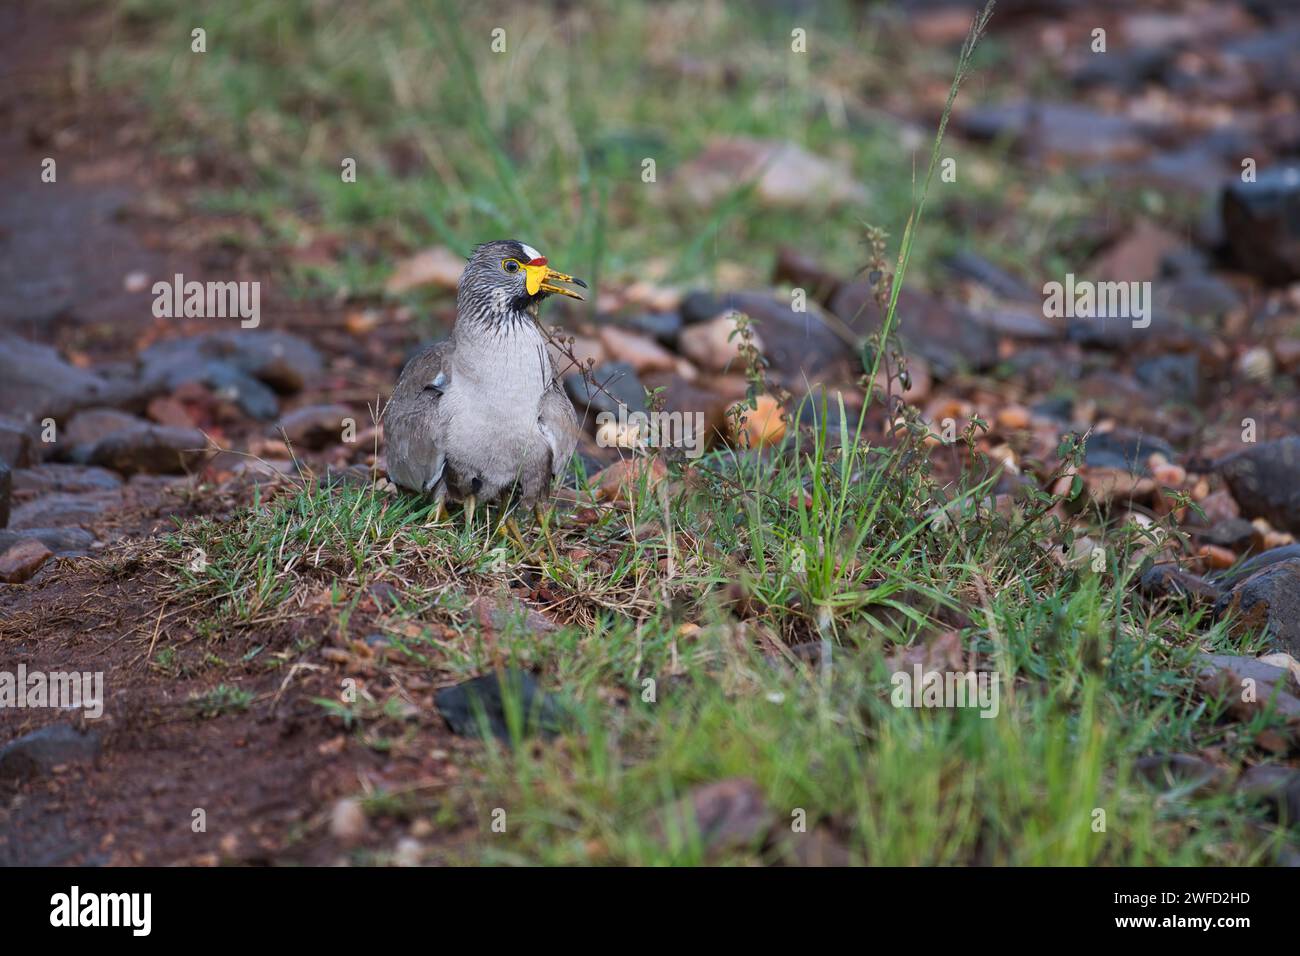 Wattled lapwing (Vanellus senegallus), parent bird with several chicks sheltering under body during a rainstorm. Legs of the young are visible. Stock Photo